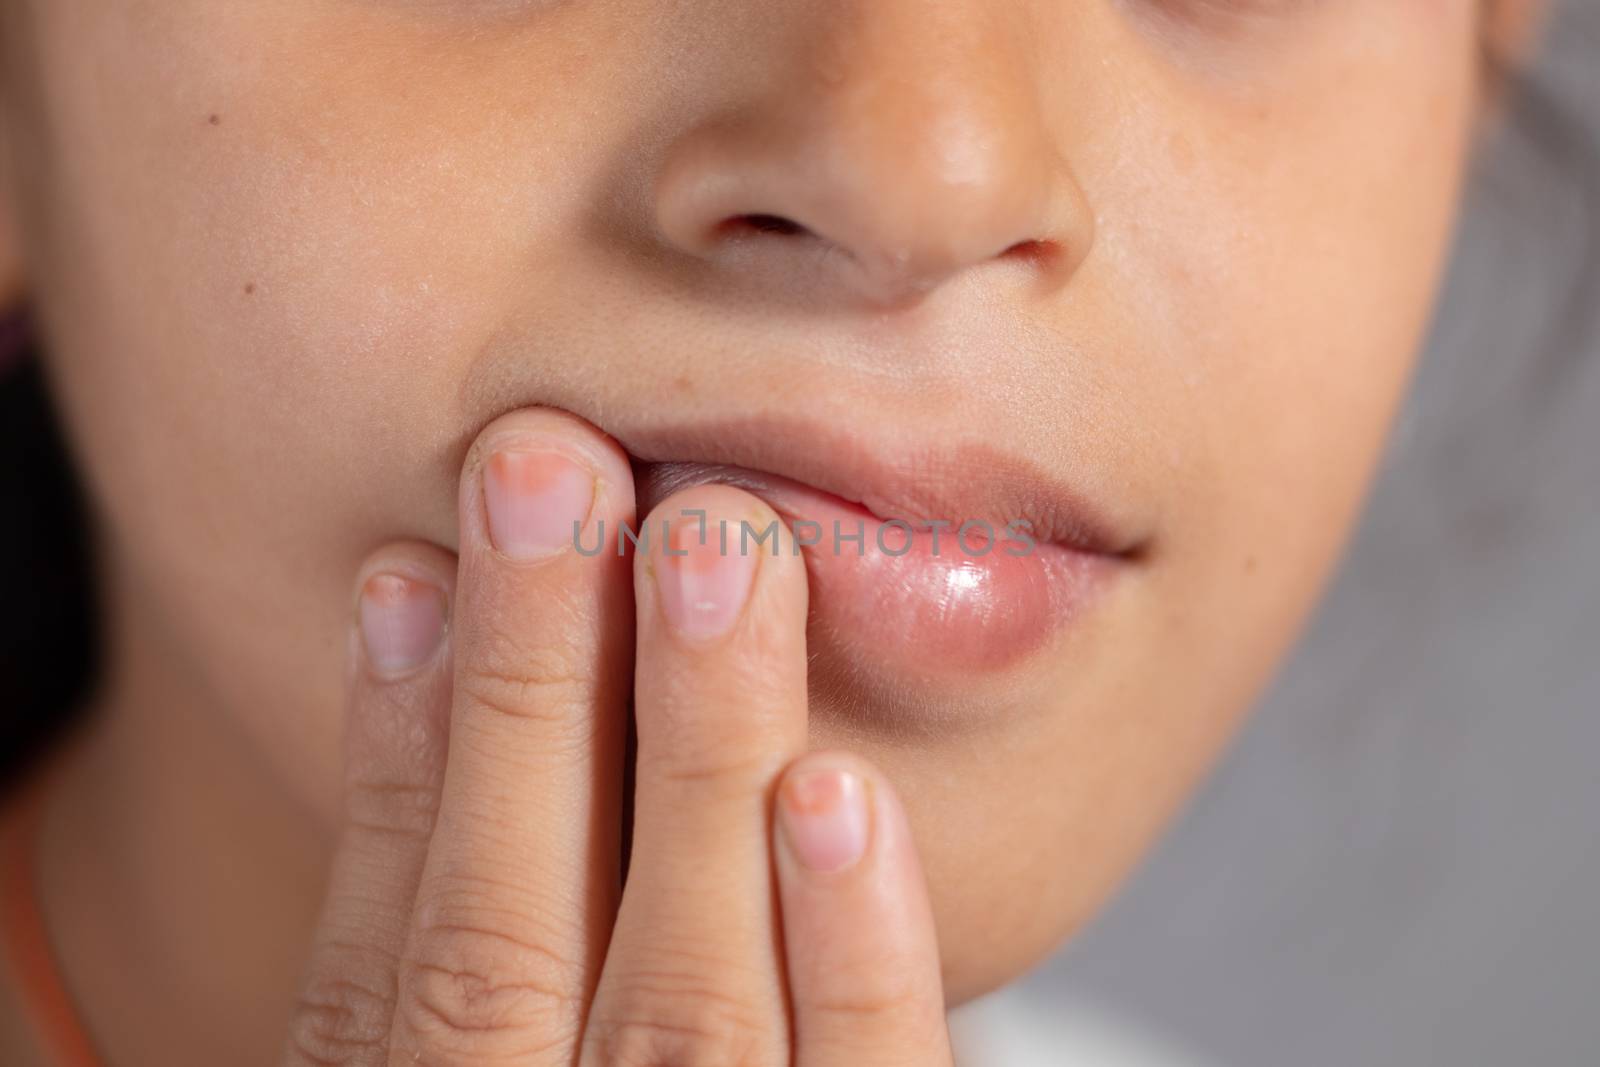 Extreme close up of child touch's her mouth - concept showing to prevent and Avoid touching your Mouth. Protect from COVID-19 or coronavirus spreading or outbreak - Don t Touch Your mouth. by lakshmiprasad.maski@gmai.com